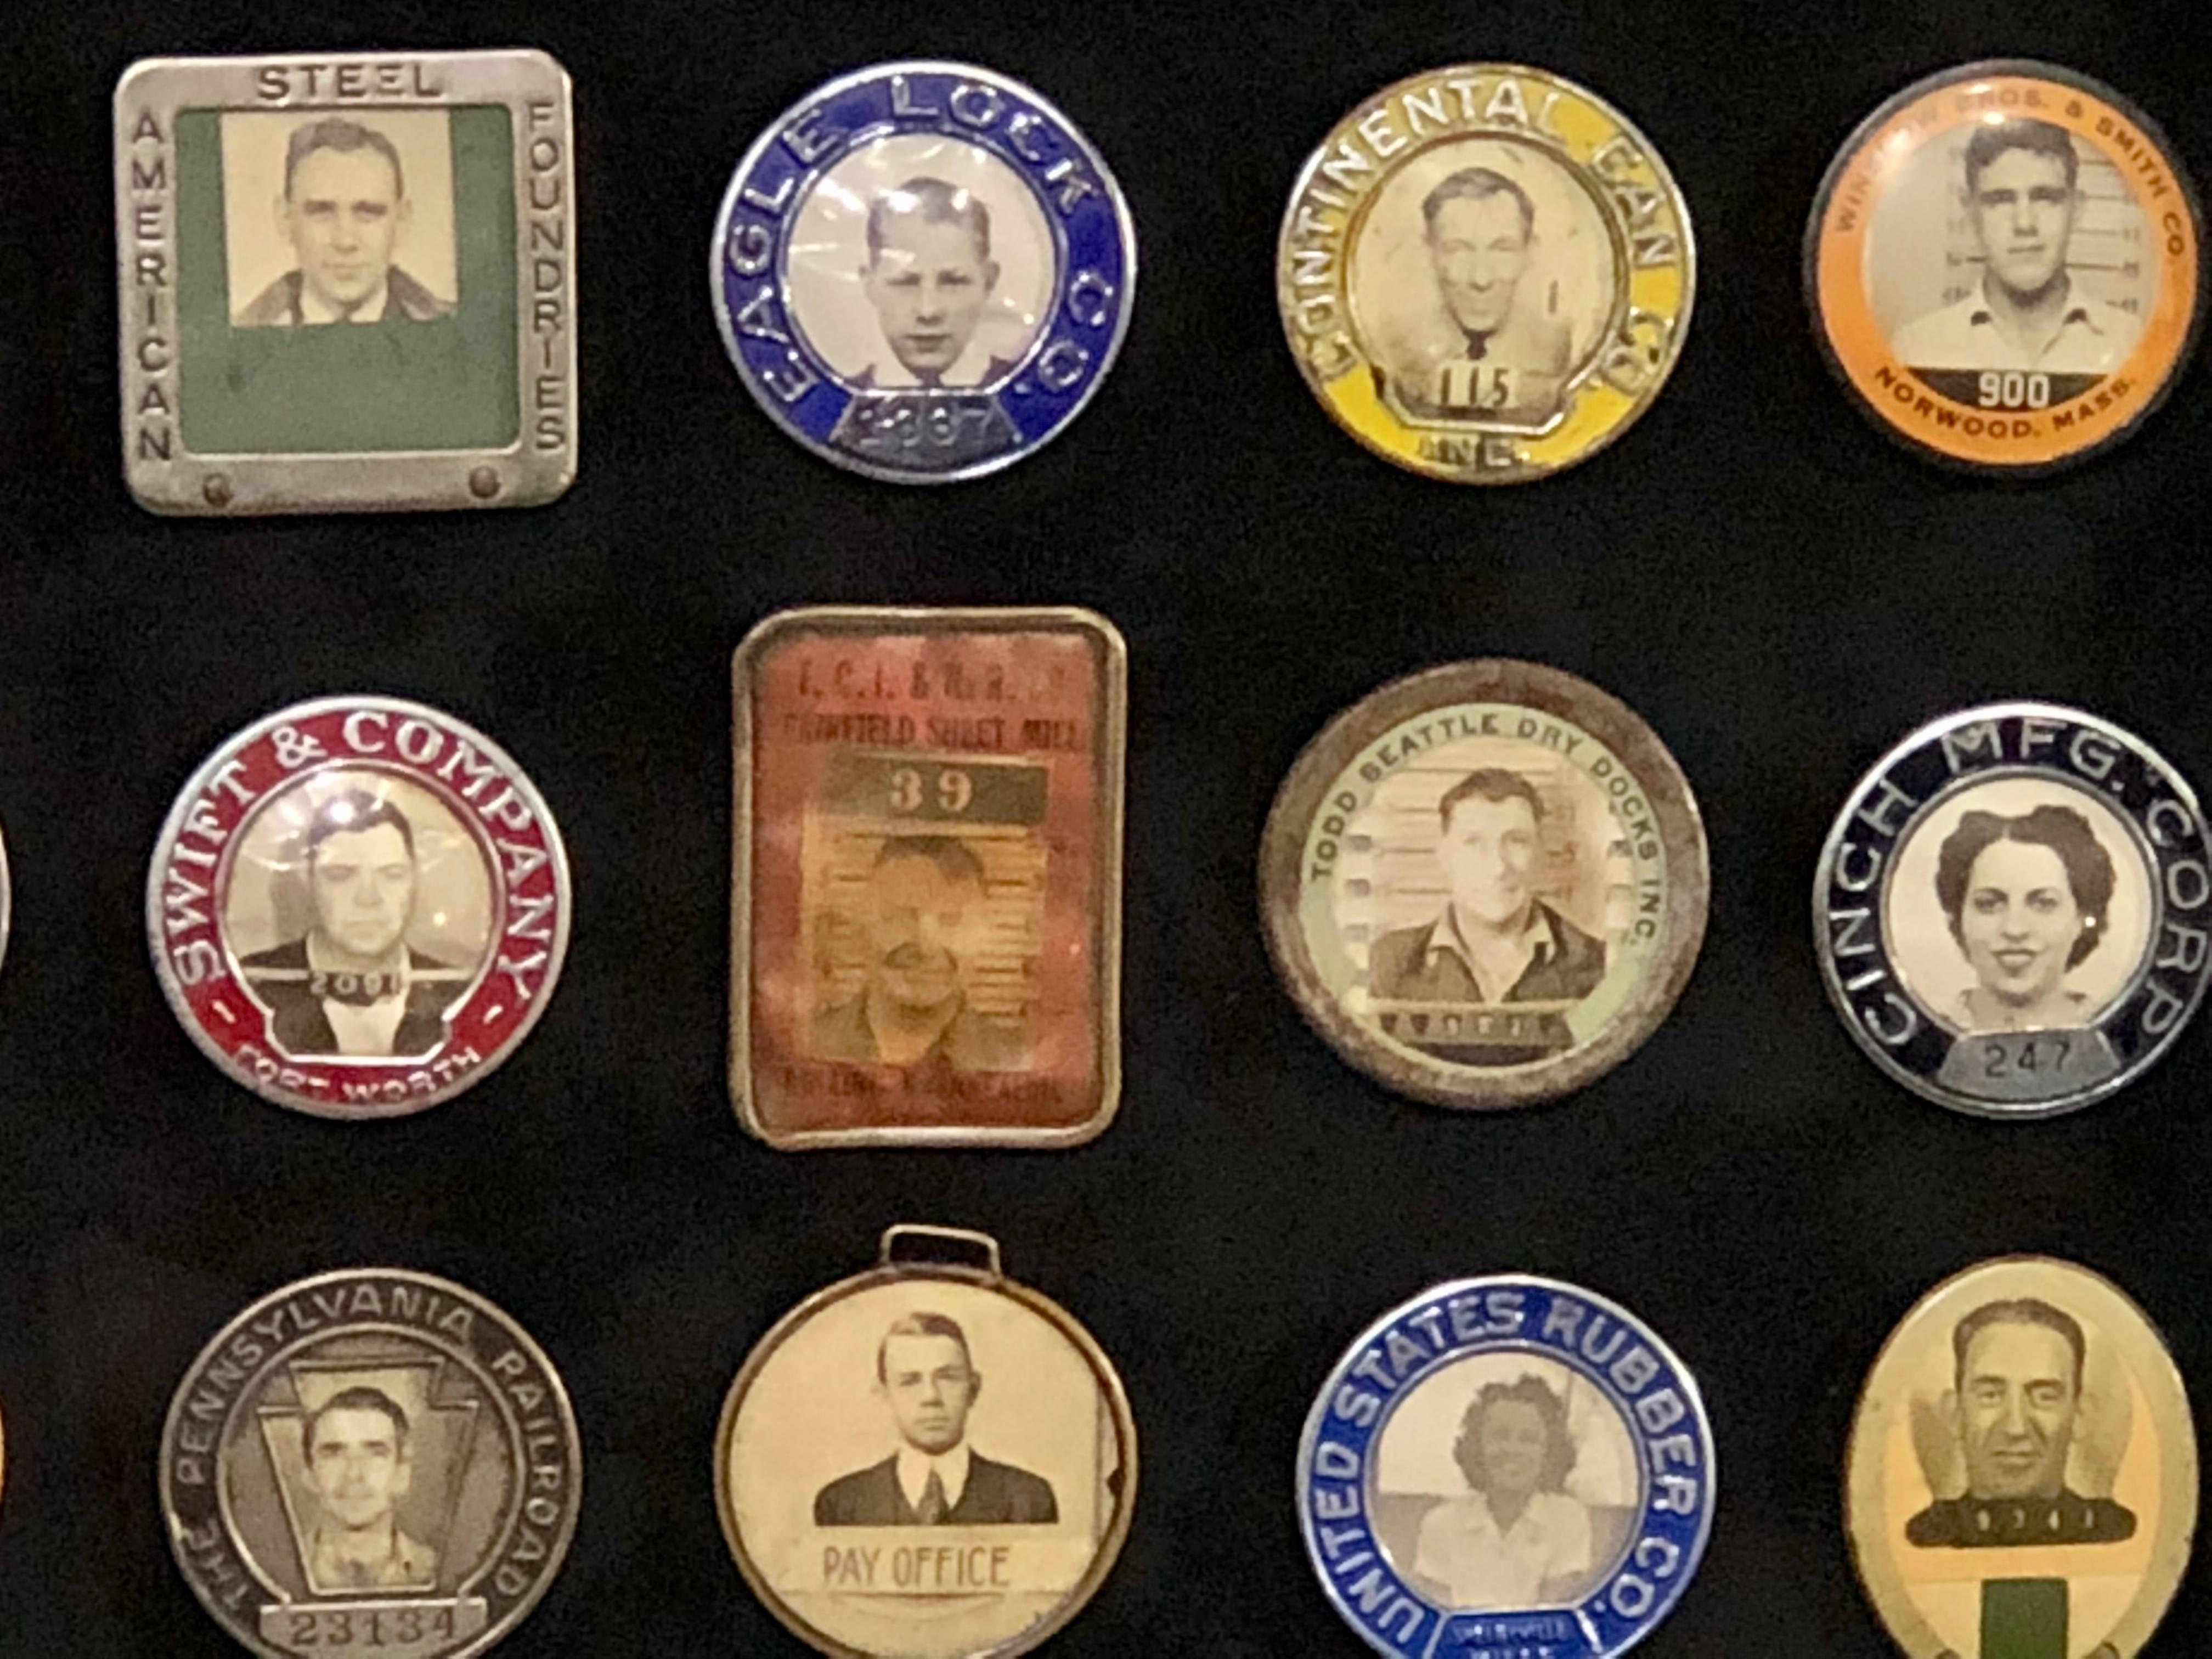 American Collection of Antique Employee Badges Professionally Set in Museum Quality Frame